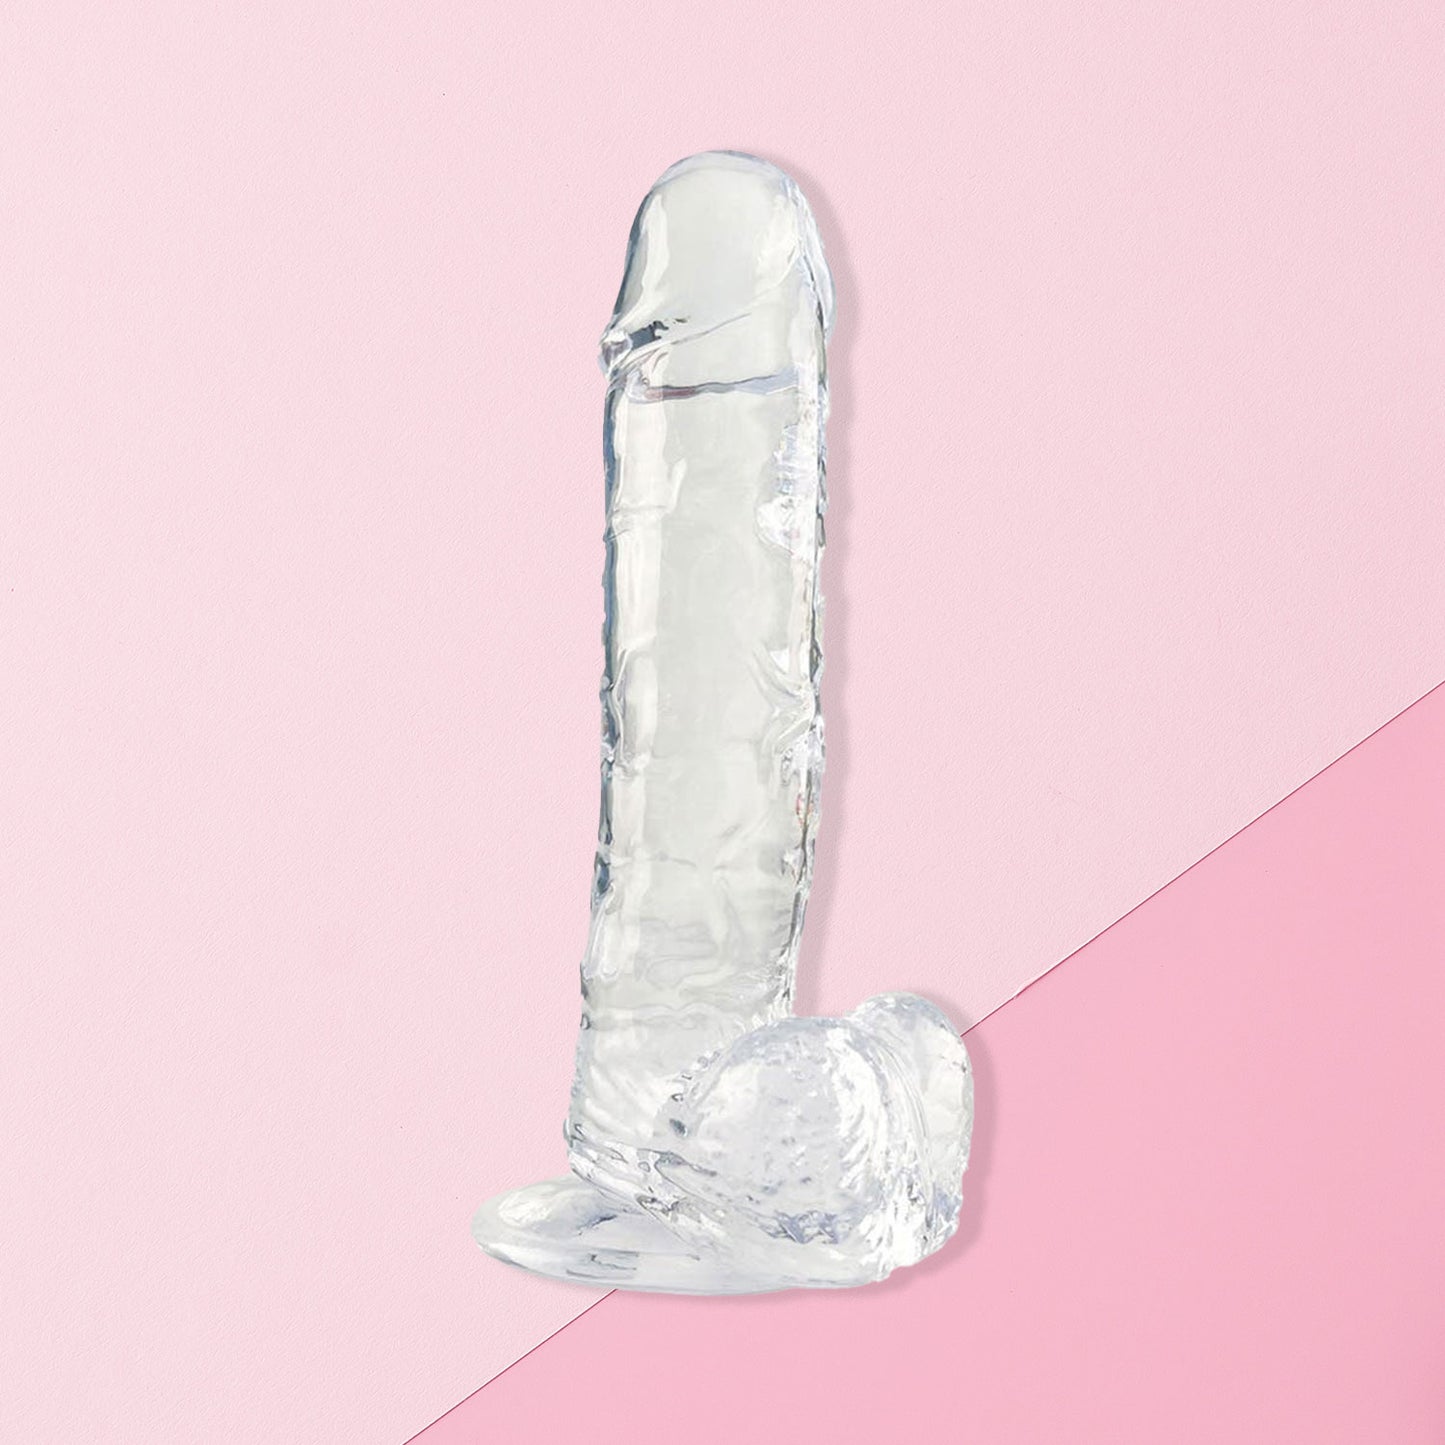 The Horny Company - No Frills Dildo 20.5cm x 3.8cm Suction Cup Dong with Balls Clear